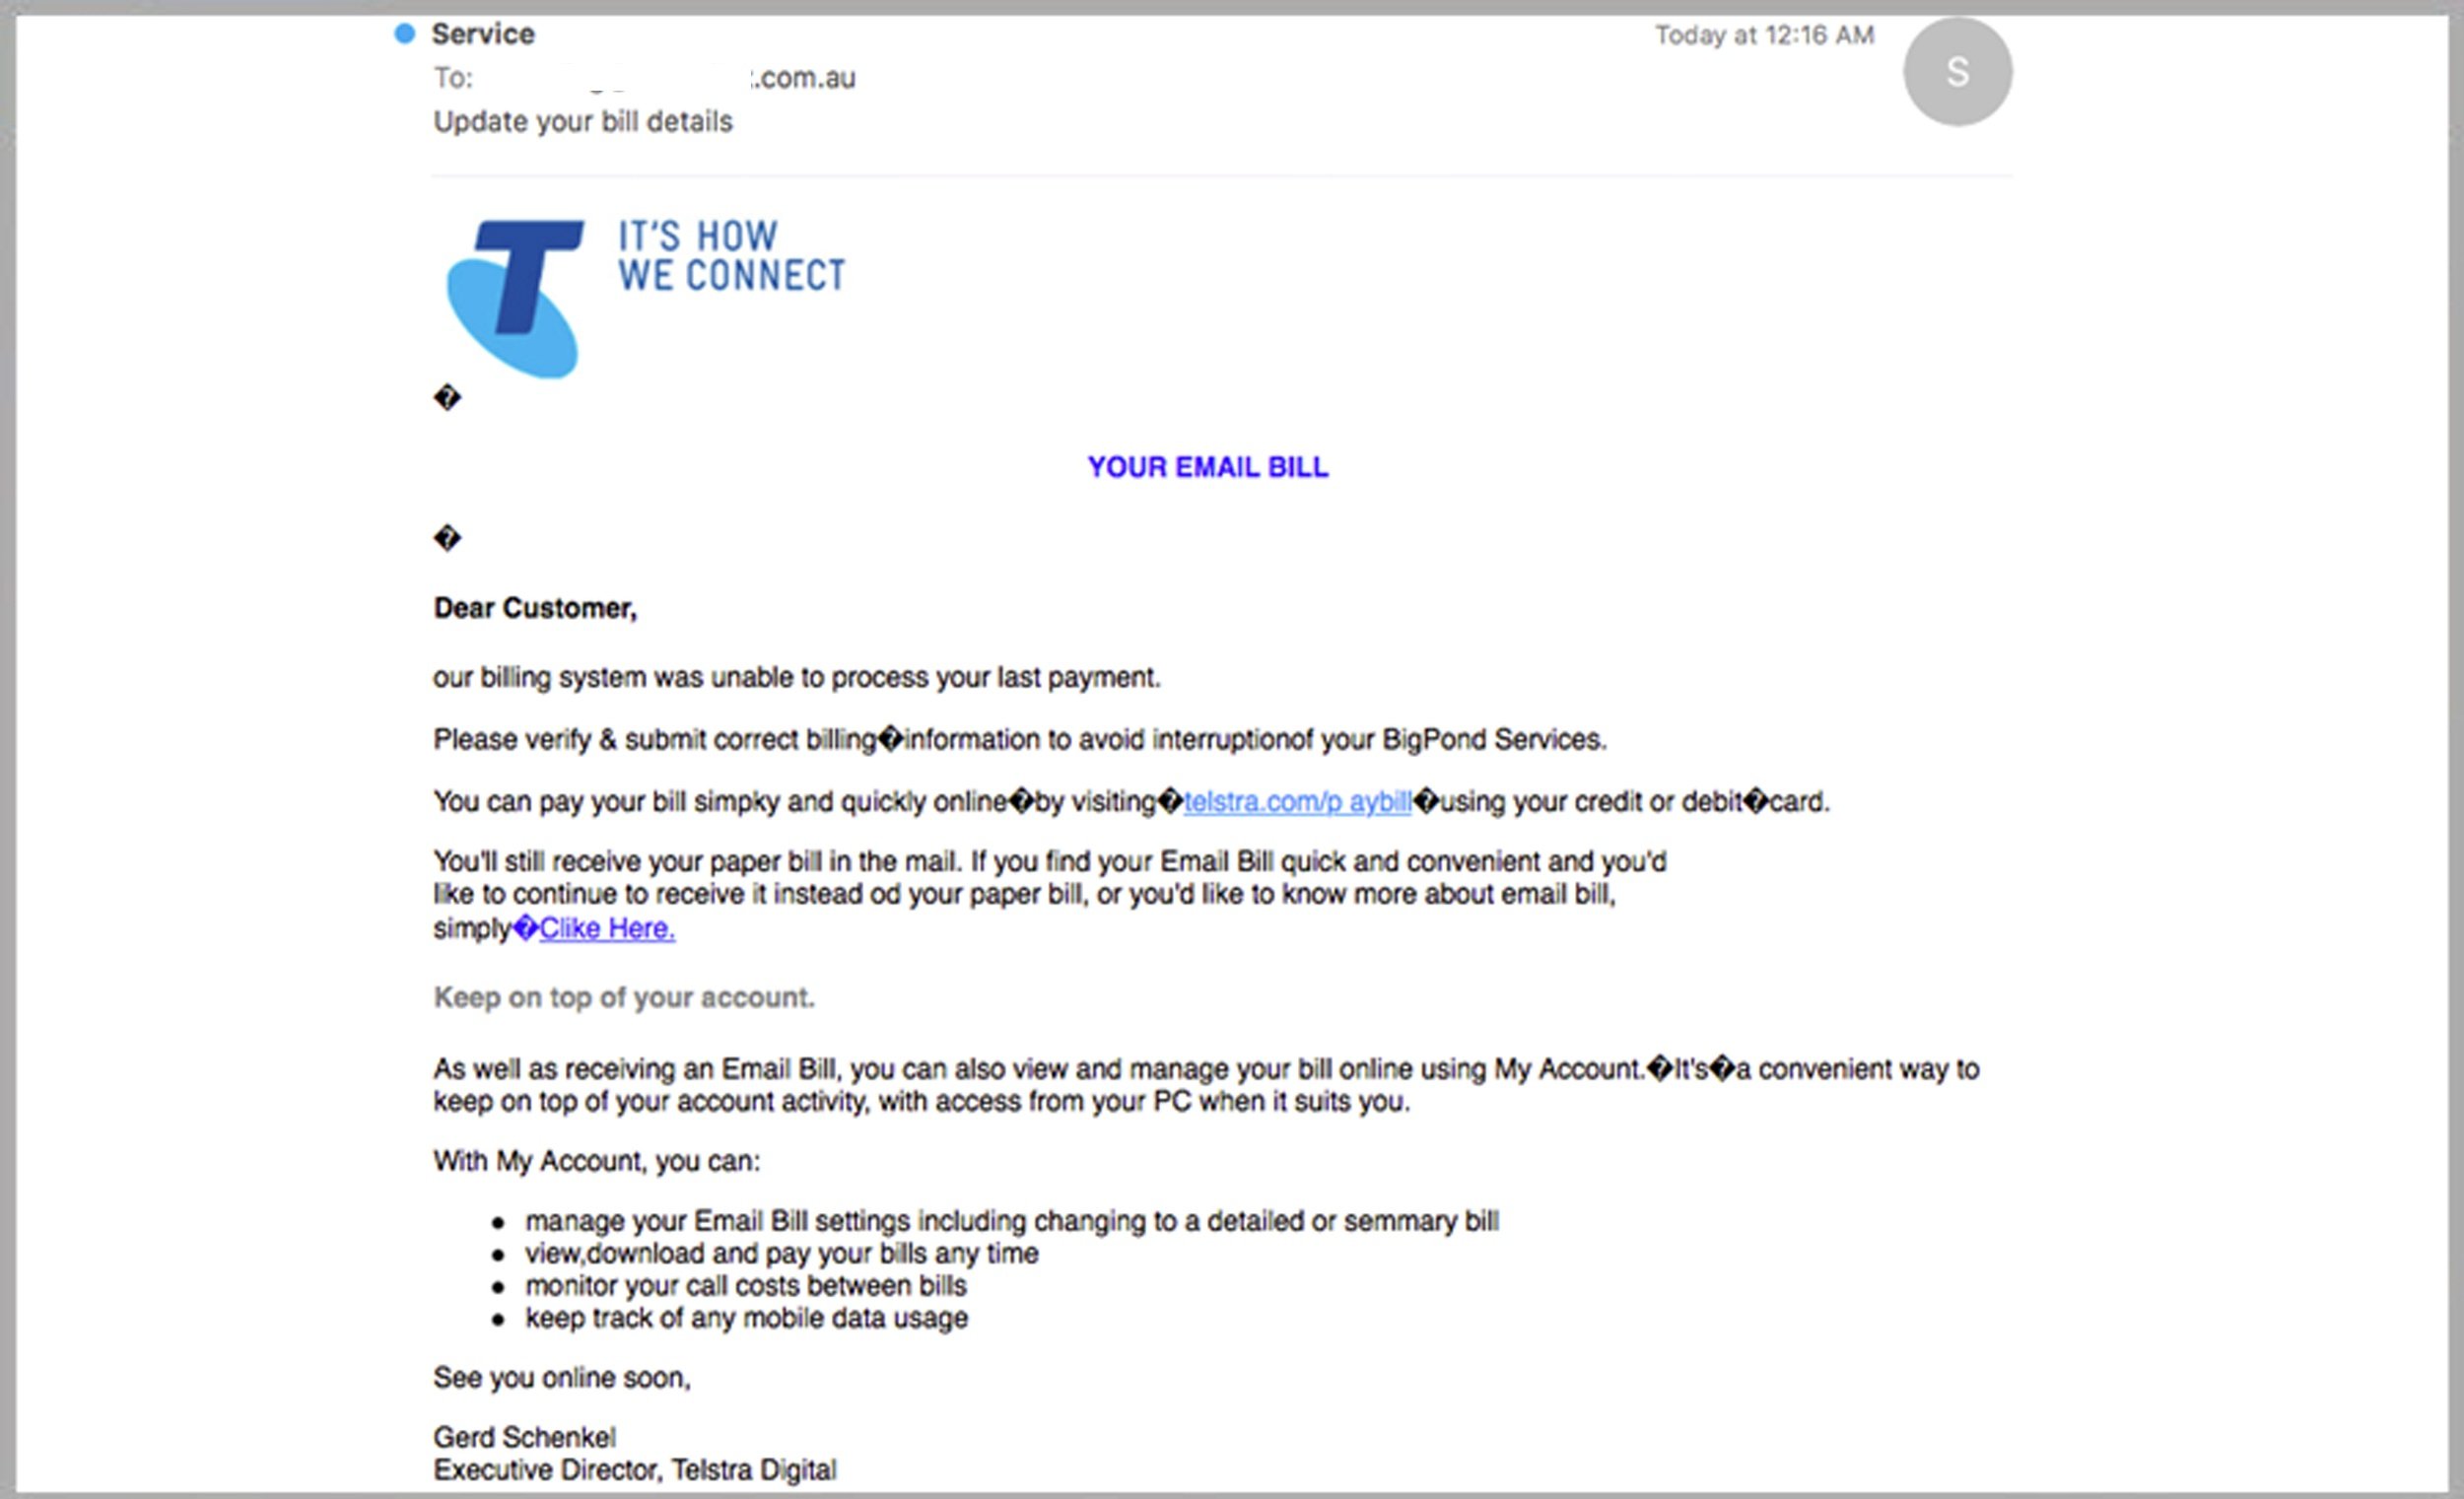 Yet Another Telstra Email Phishing Scam!